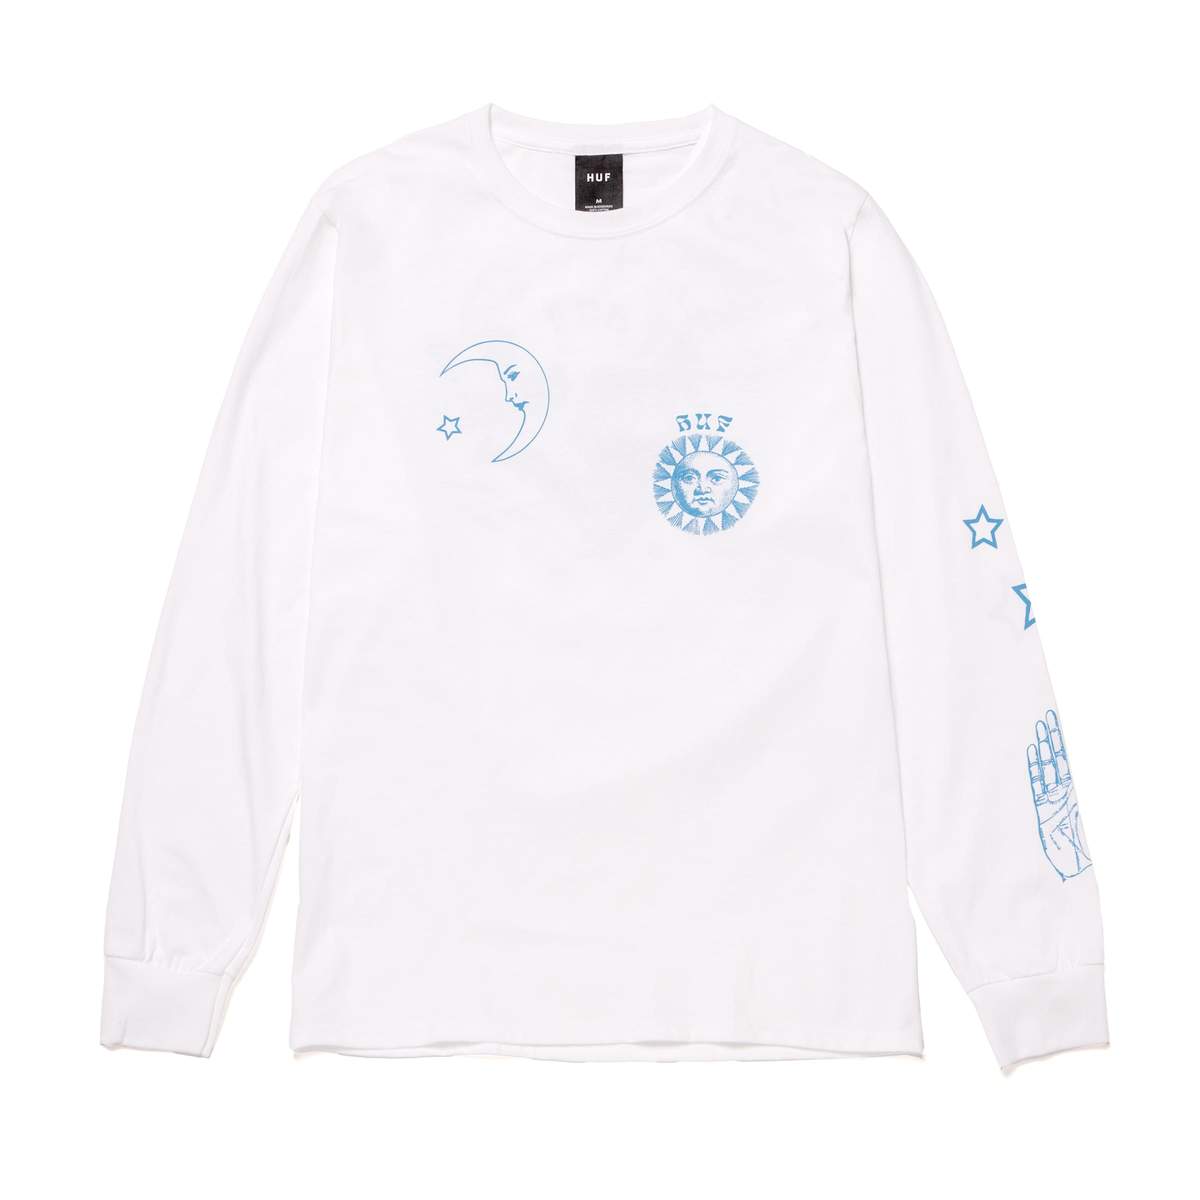 Gratefully Yours Long Sleeve Tee - White